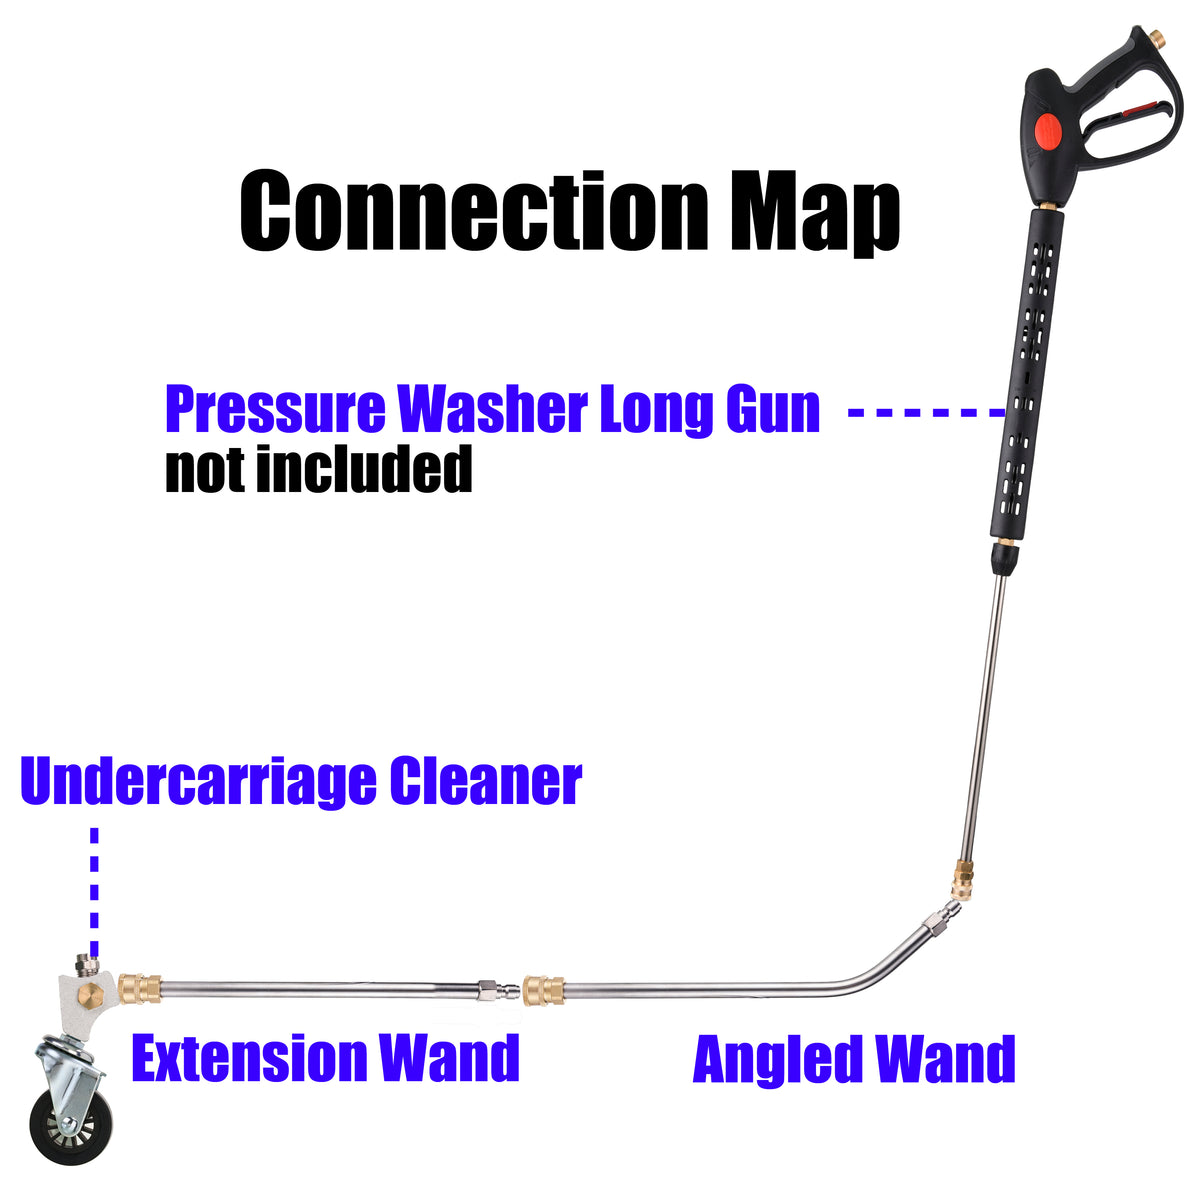 Pressure Washer Undercarriage Cleaner 1500 Psi To 4000 Psi Undercarriage  Water Broom With 13 Inch Extension Wand And 45 Degree Angled Wand